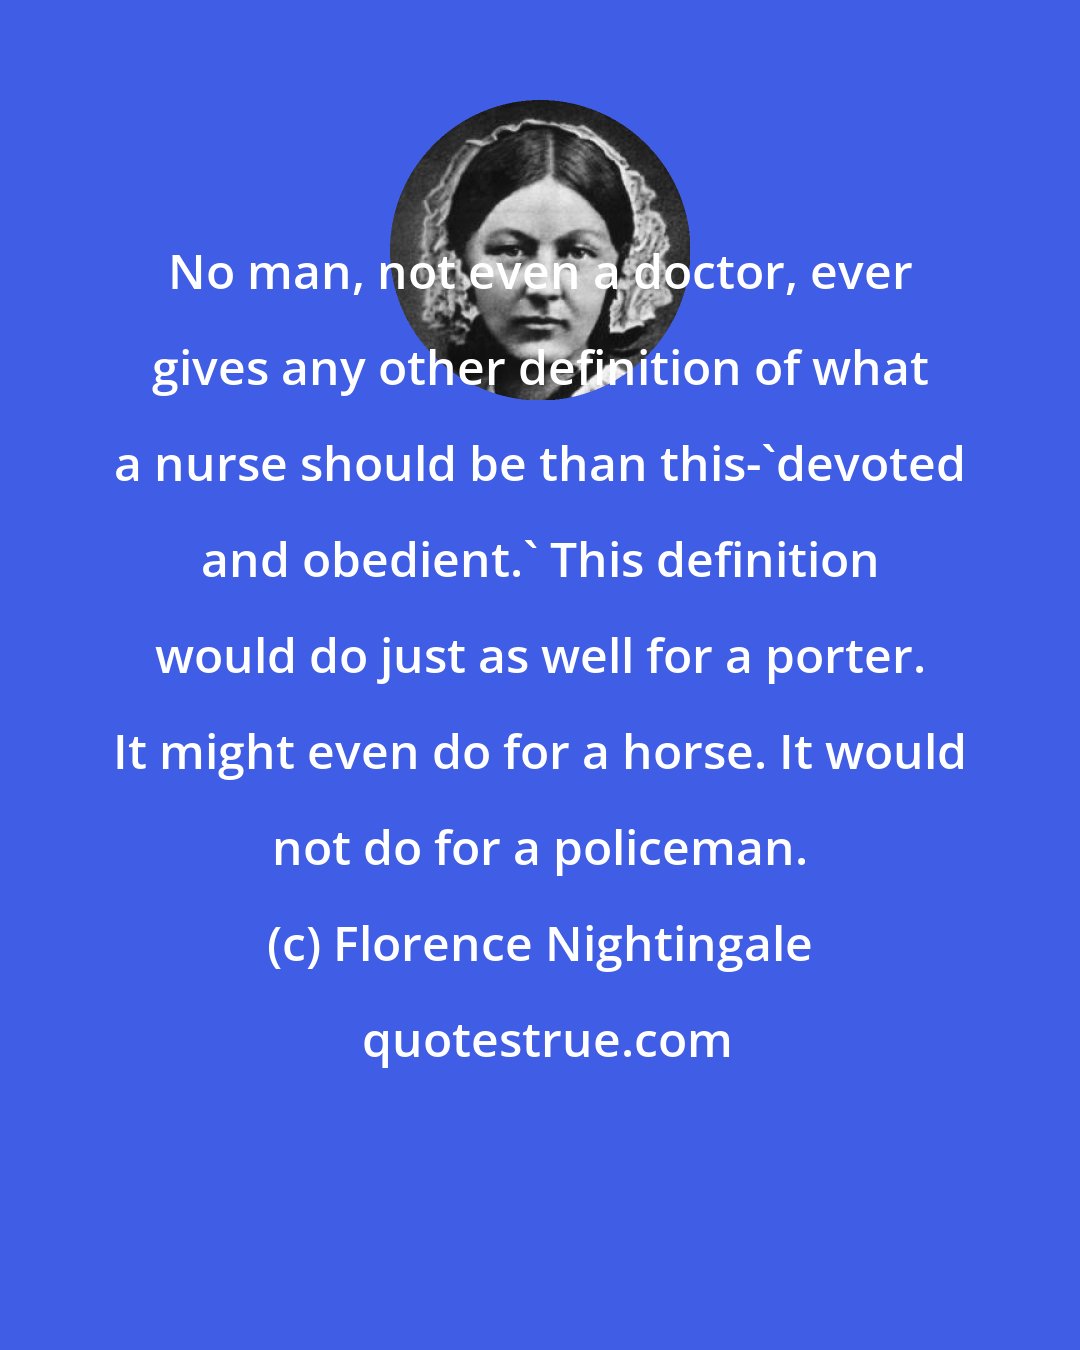 Florence Nightingale: No man, not even a doctor, ever gives any other definition of what a nurse should be than this-'devoted and obedient.' This definition would do just as well for a porter. It might even do for a horse. It would not do for a policeman.